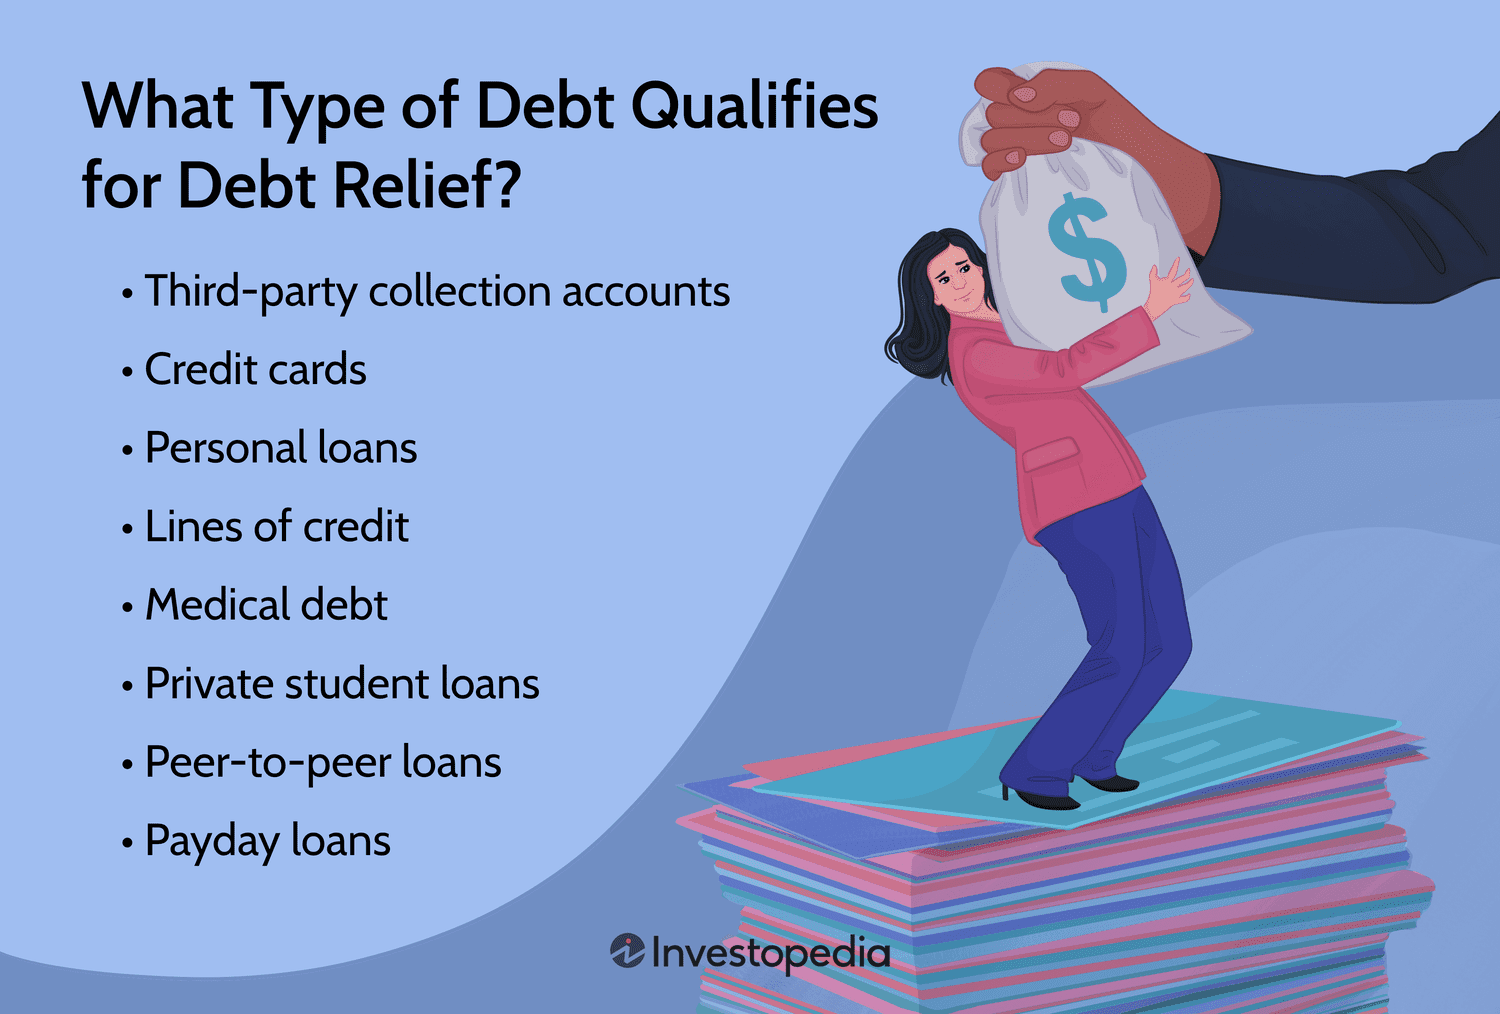 What is a Debt Relief?